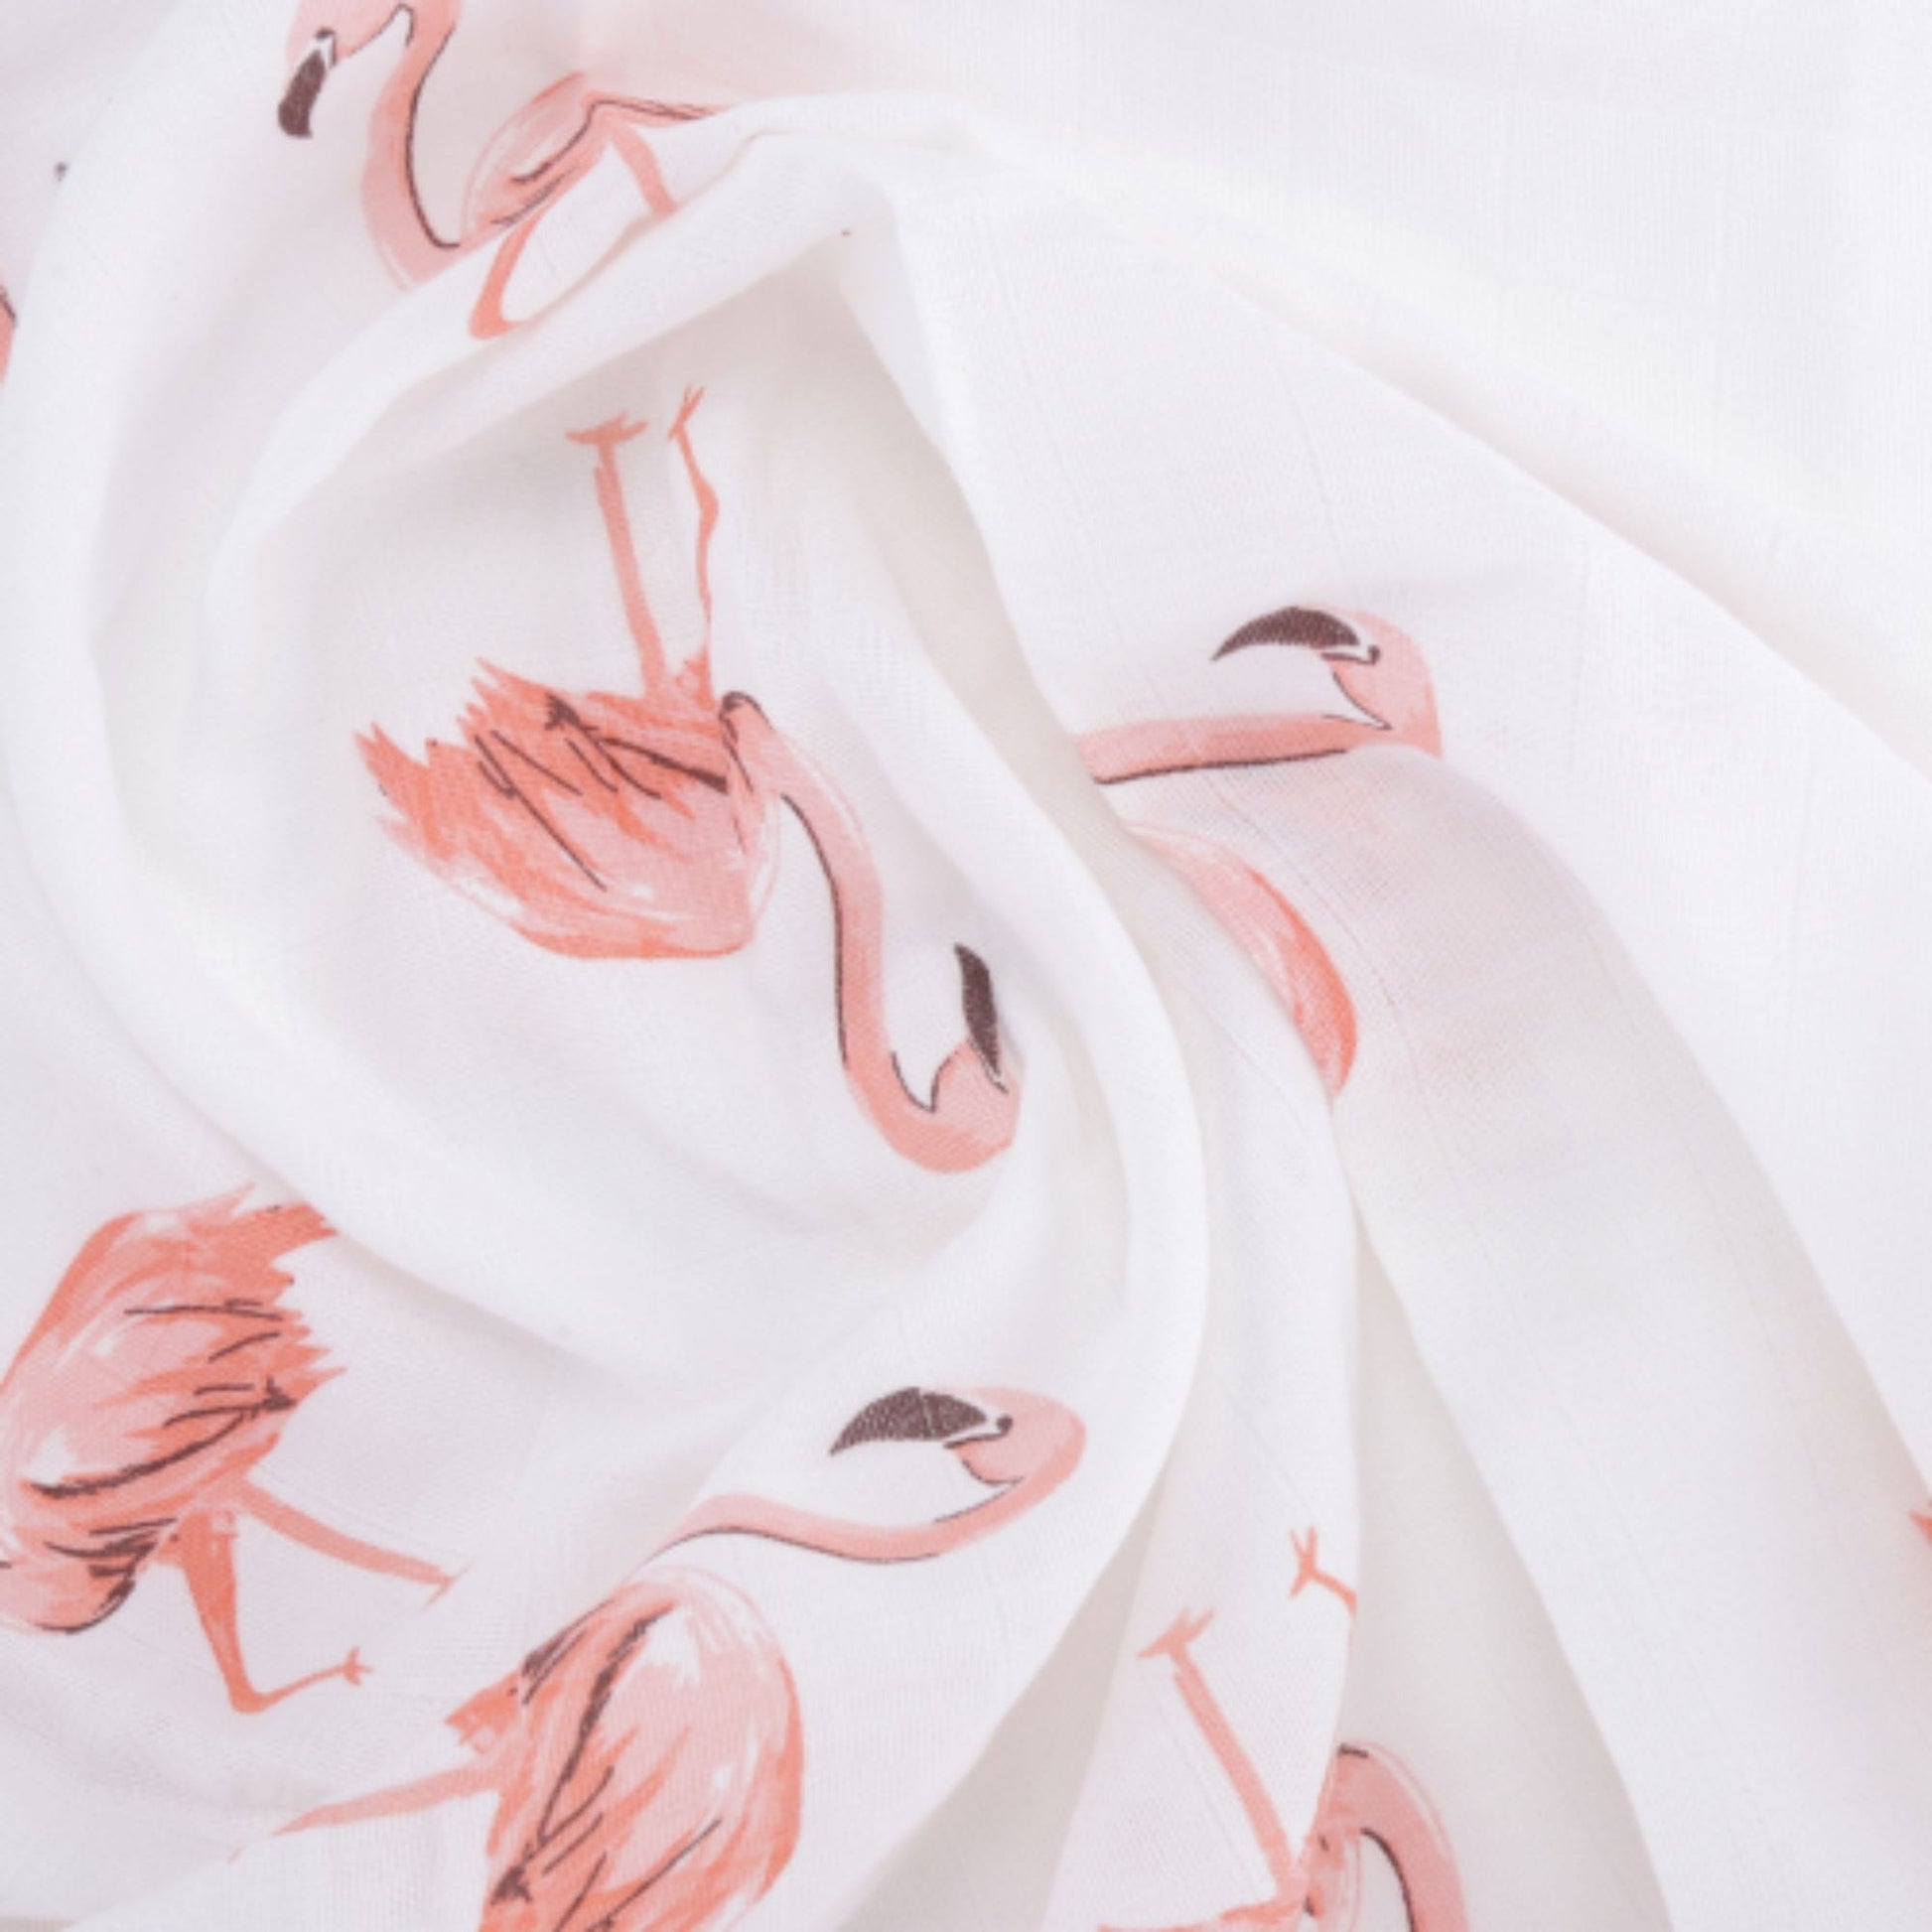 Twinkle Collection 100% Cotton Muslin Swaddle Pack Of 2 ( Pink Star, Flamingo) - haus & kinder